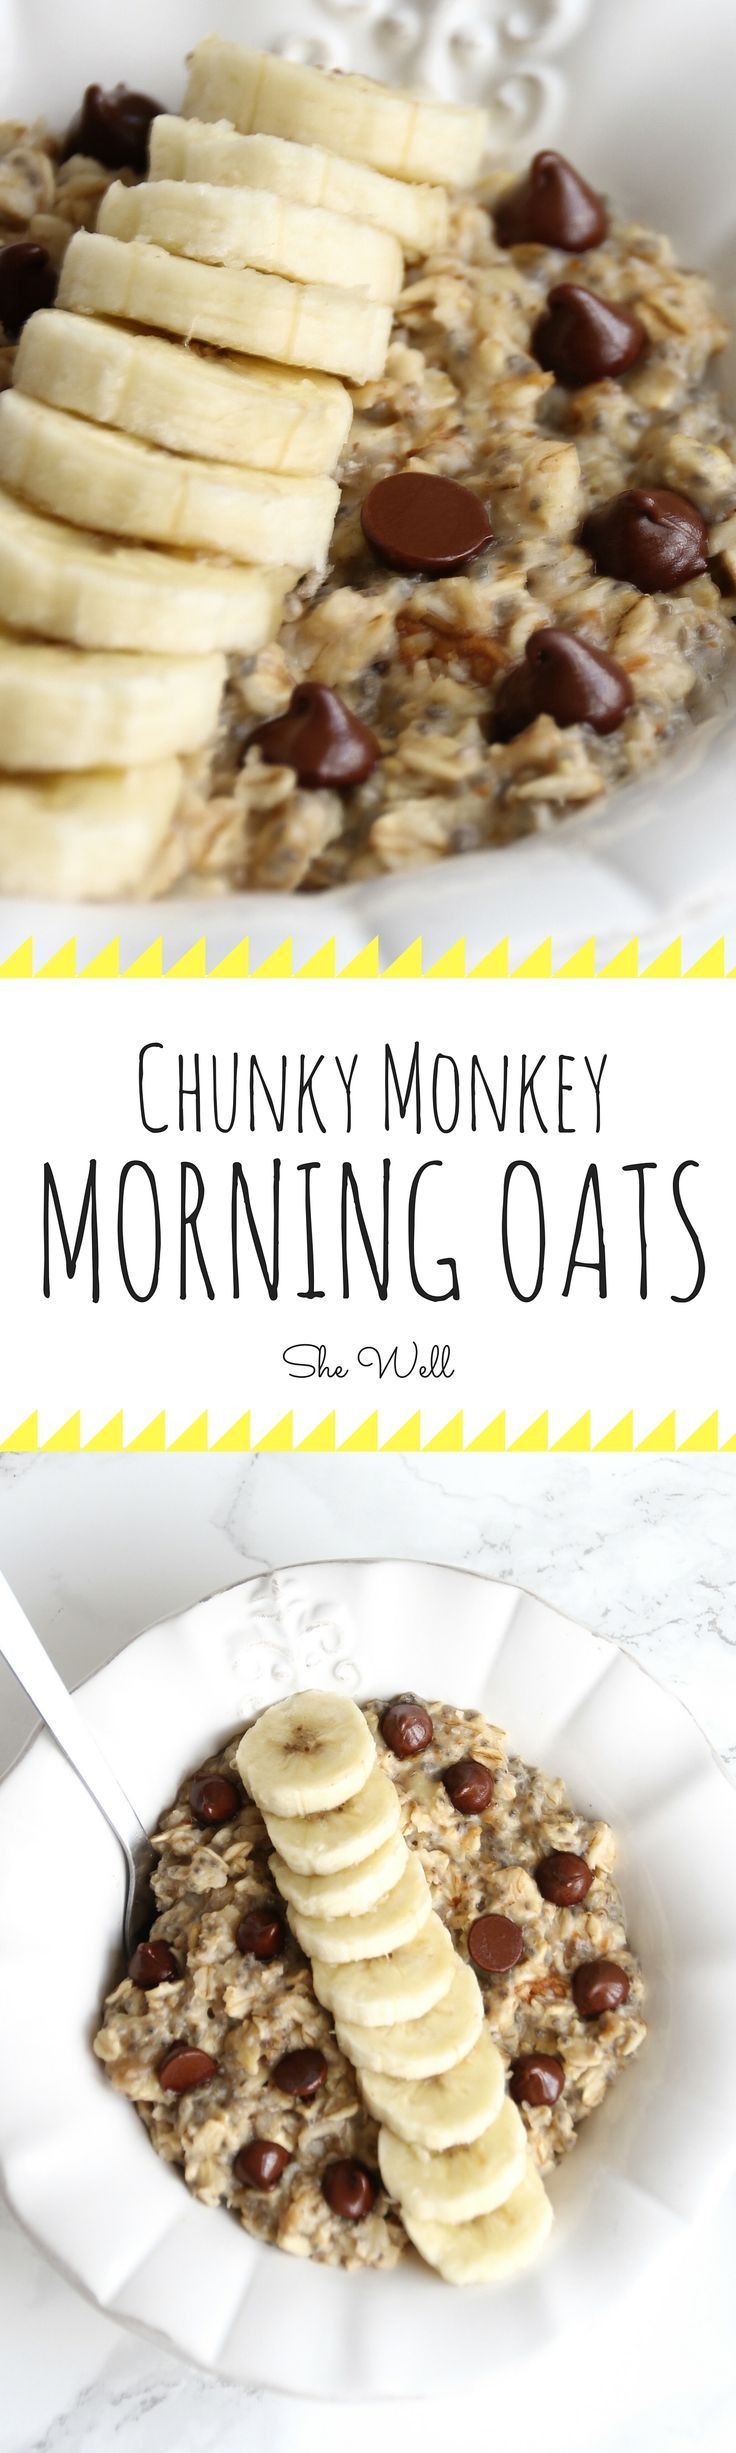 Easy banana, chocolate & peanut butter Chunky Monkey Morning Oats! The perfect breakfast for people who are vegan, vegetarian,